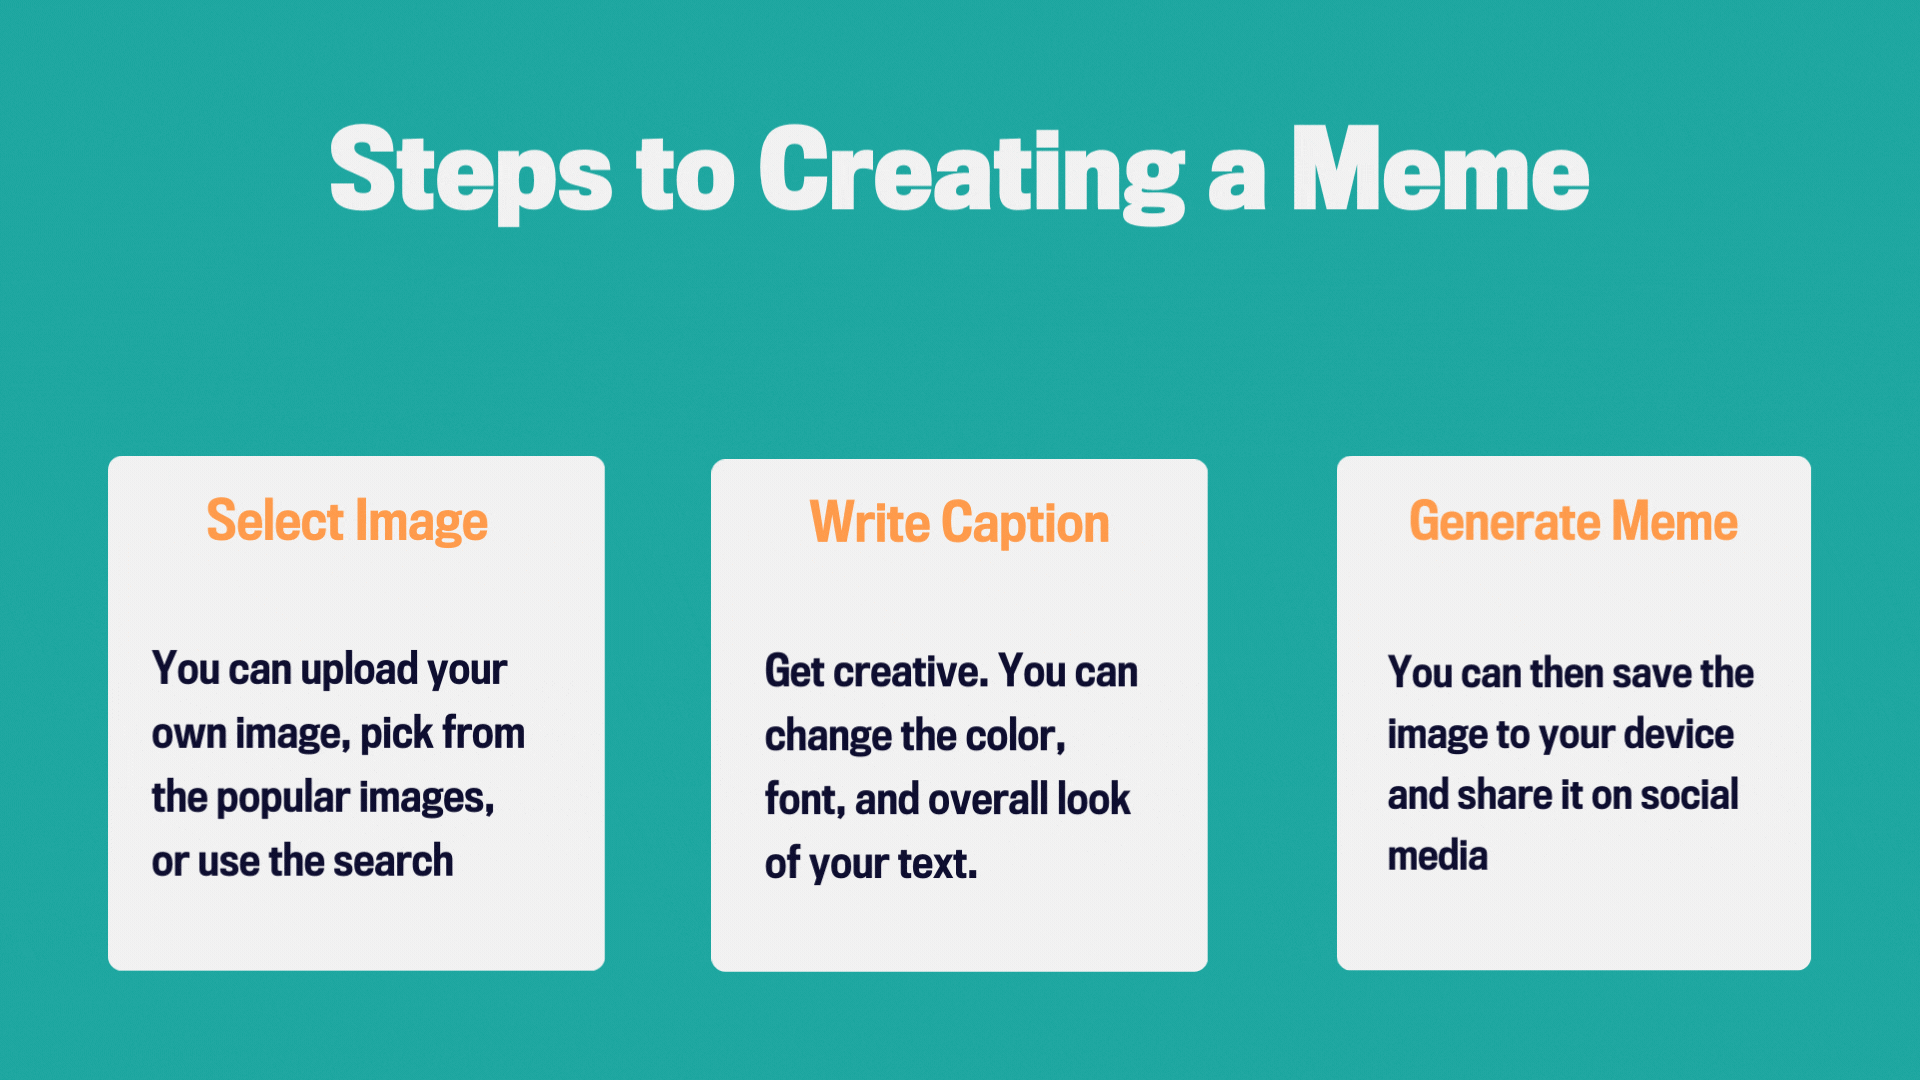 Summary of steps to creating a meme